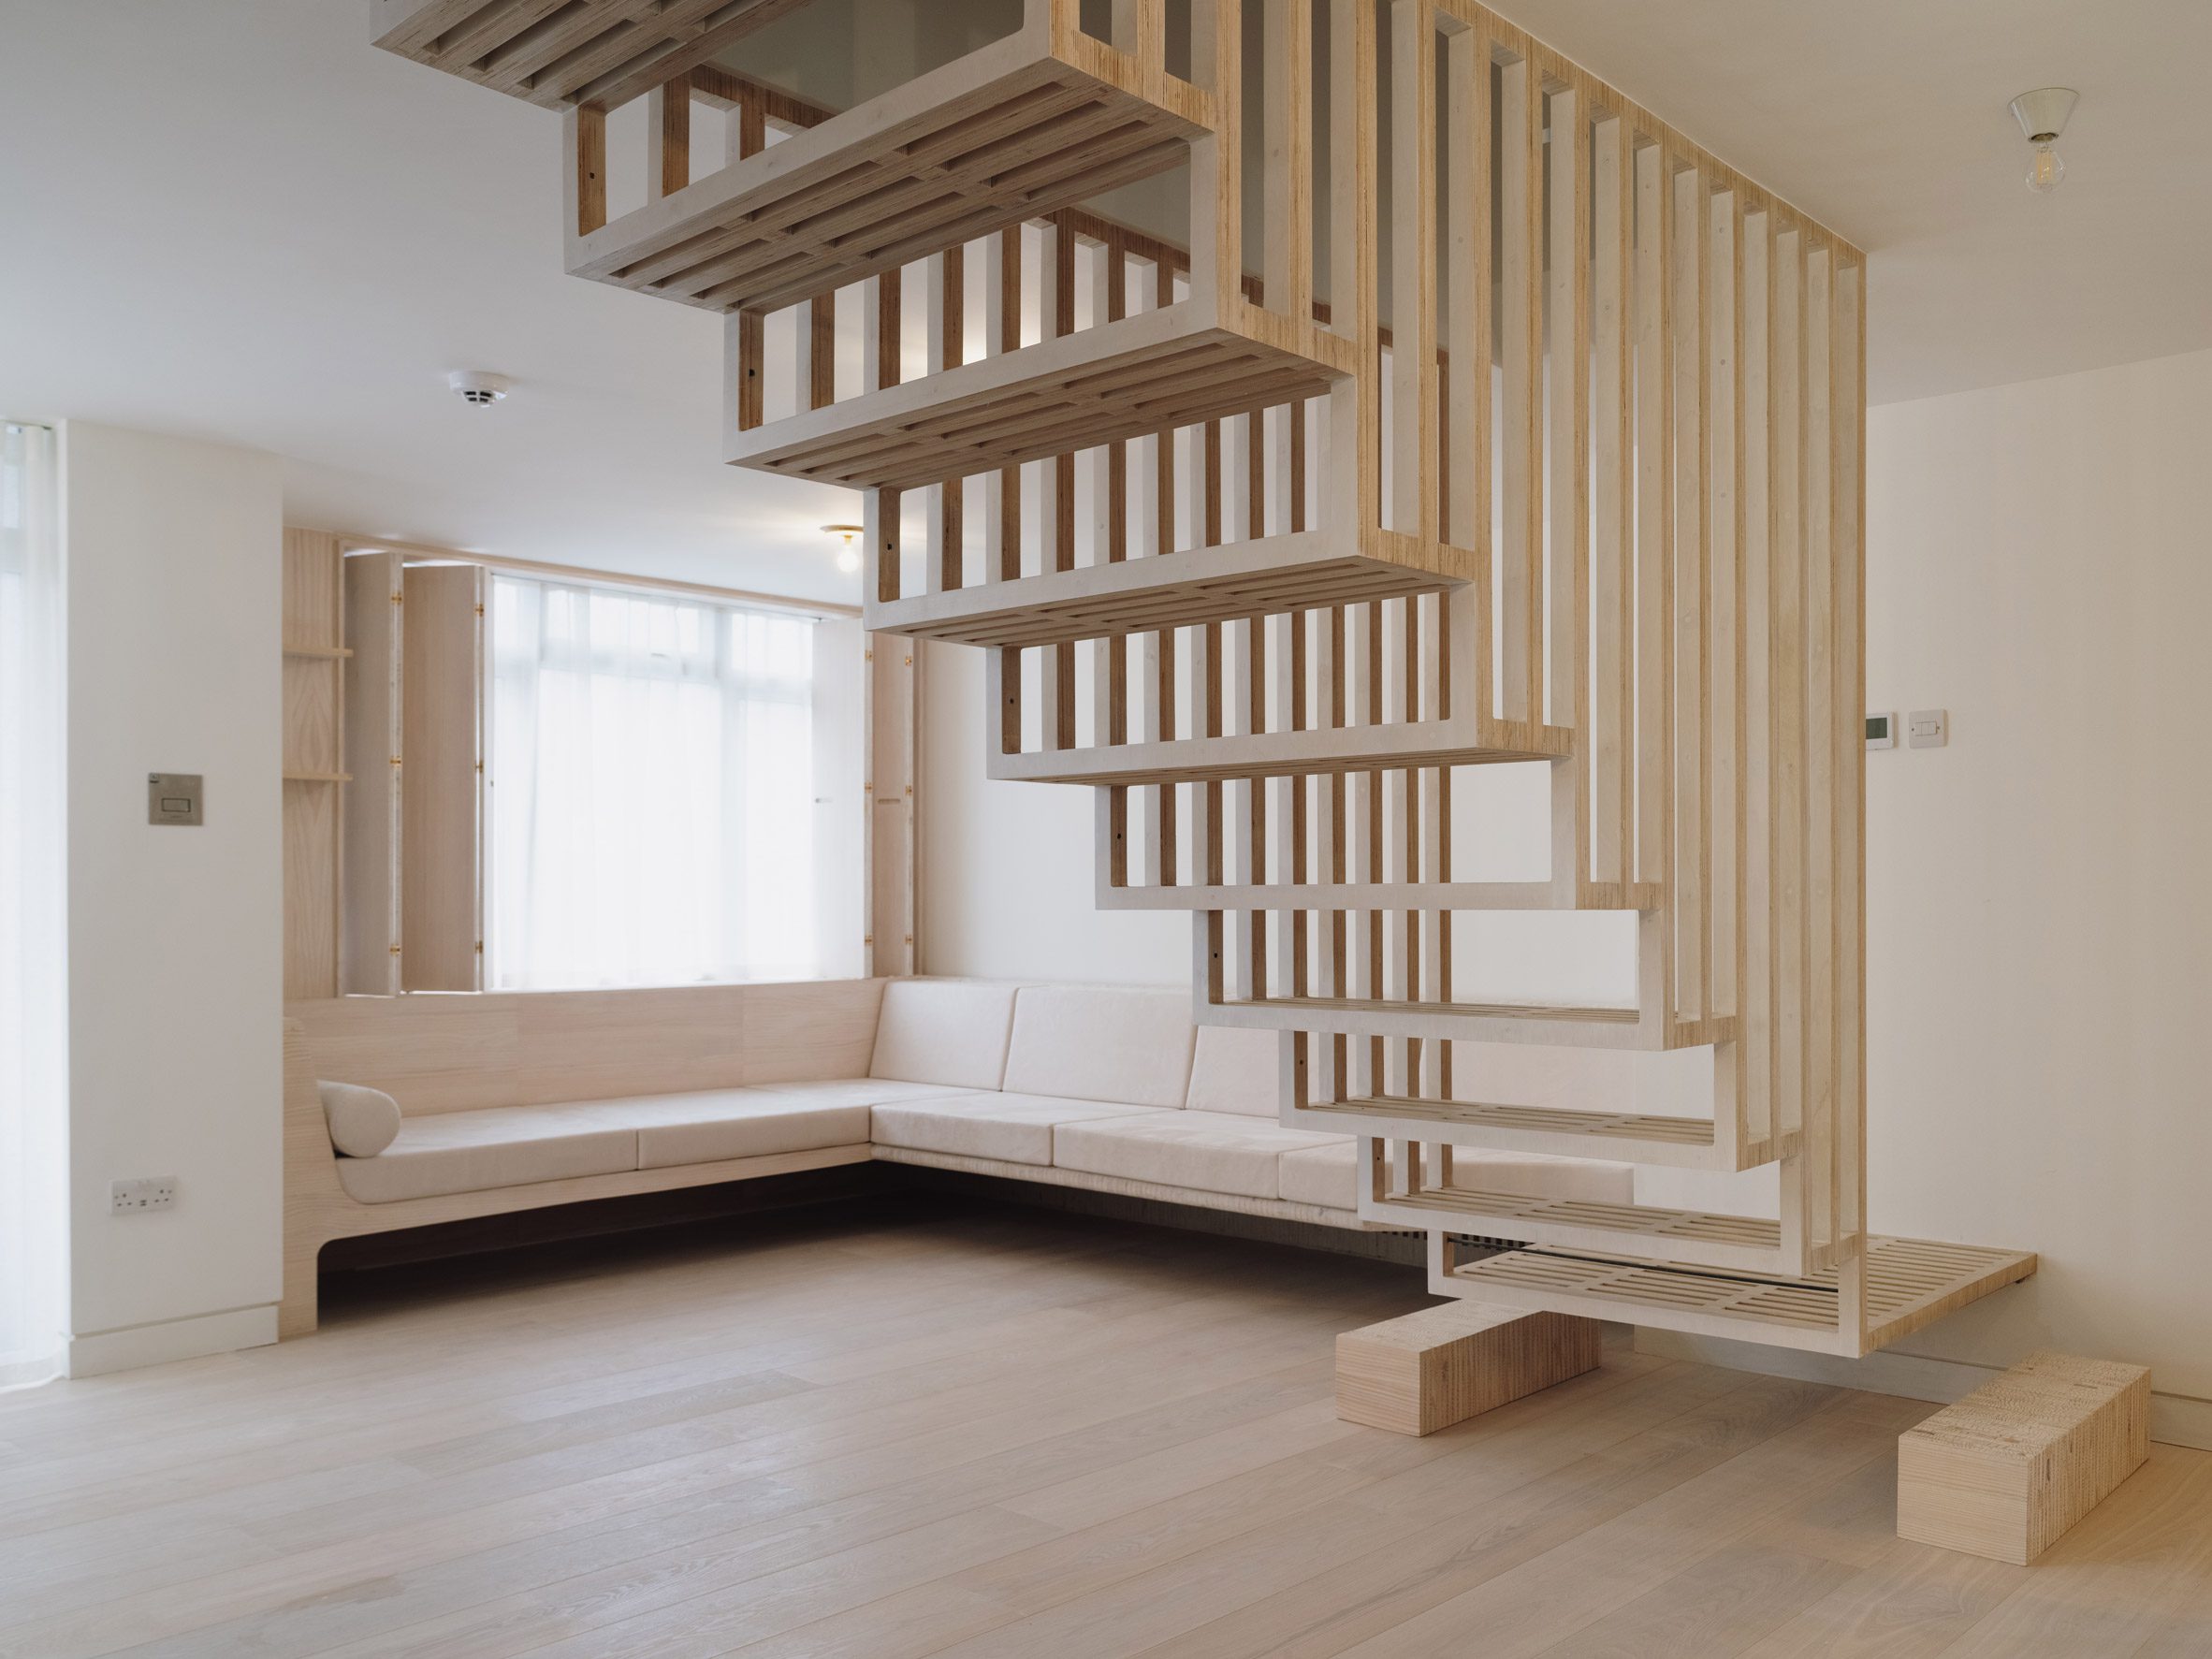 Staircase and living space in Dragon Flat by Tsuruta Architects